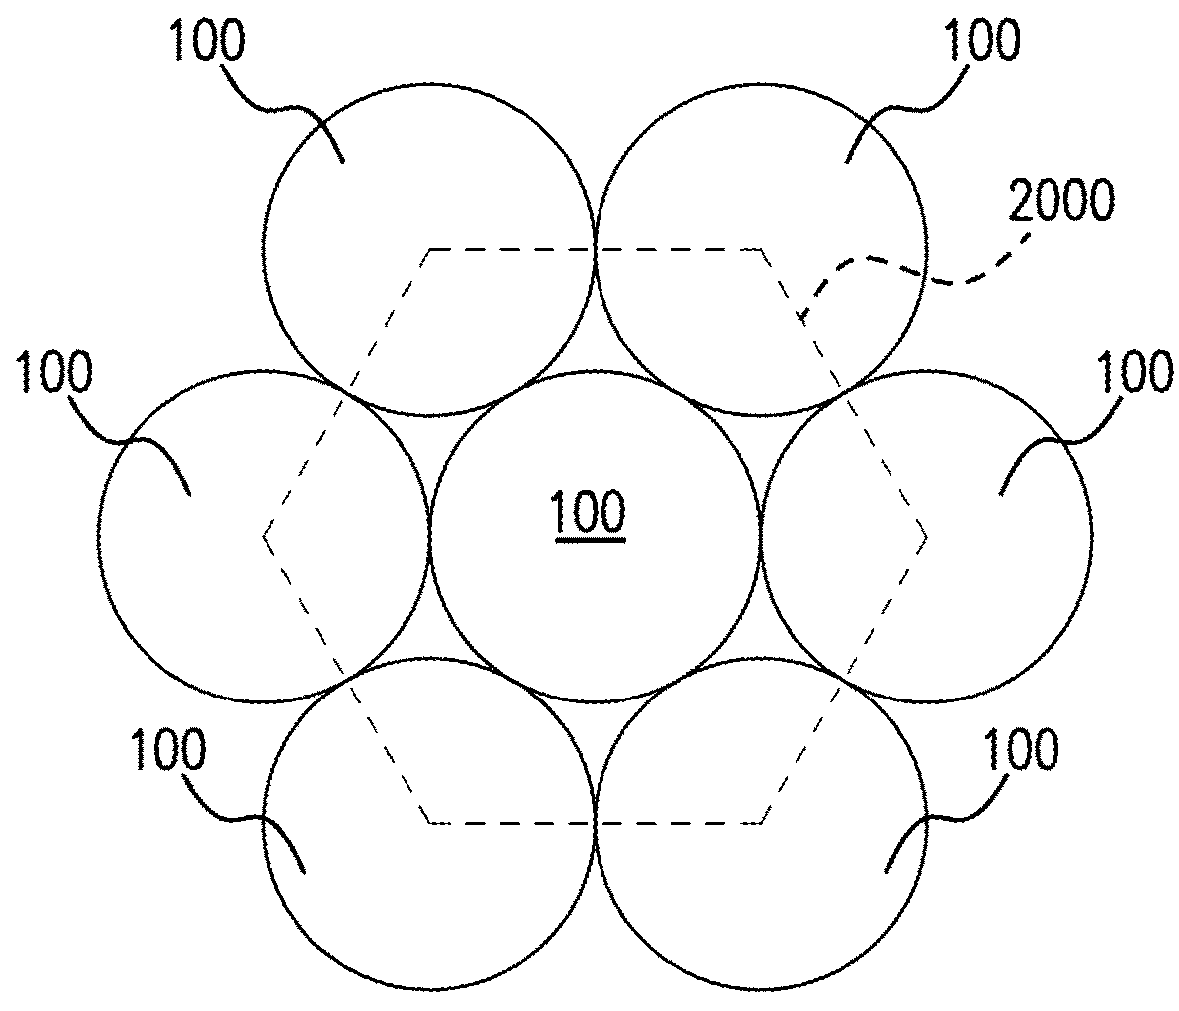 Space-qualified solar cell assembly comprising space-qualified solar cells shaped as a portion of a circle